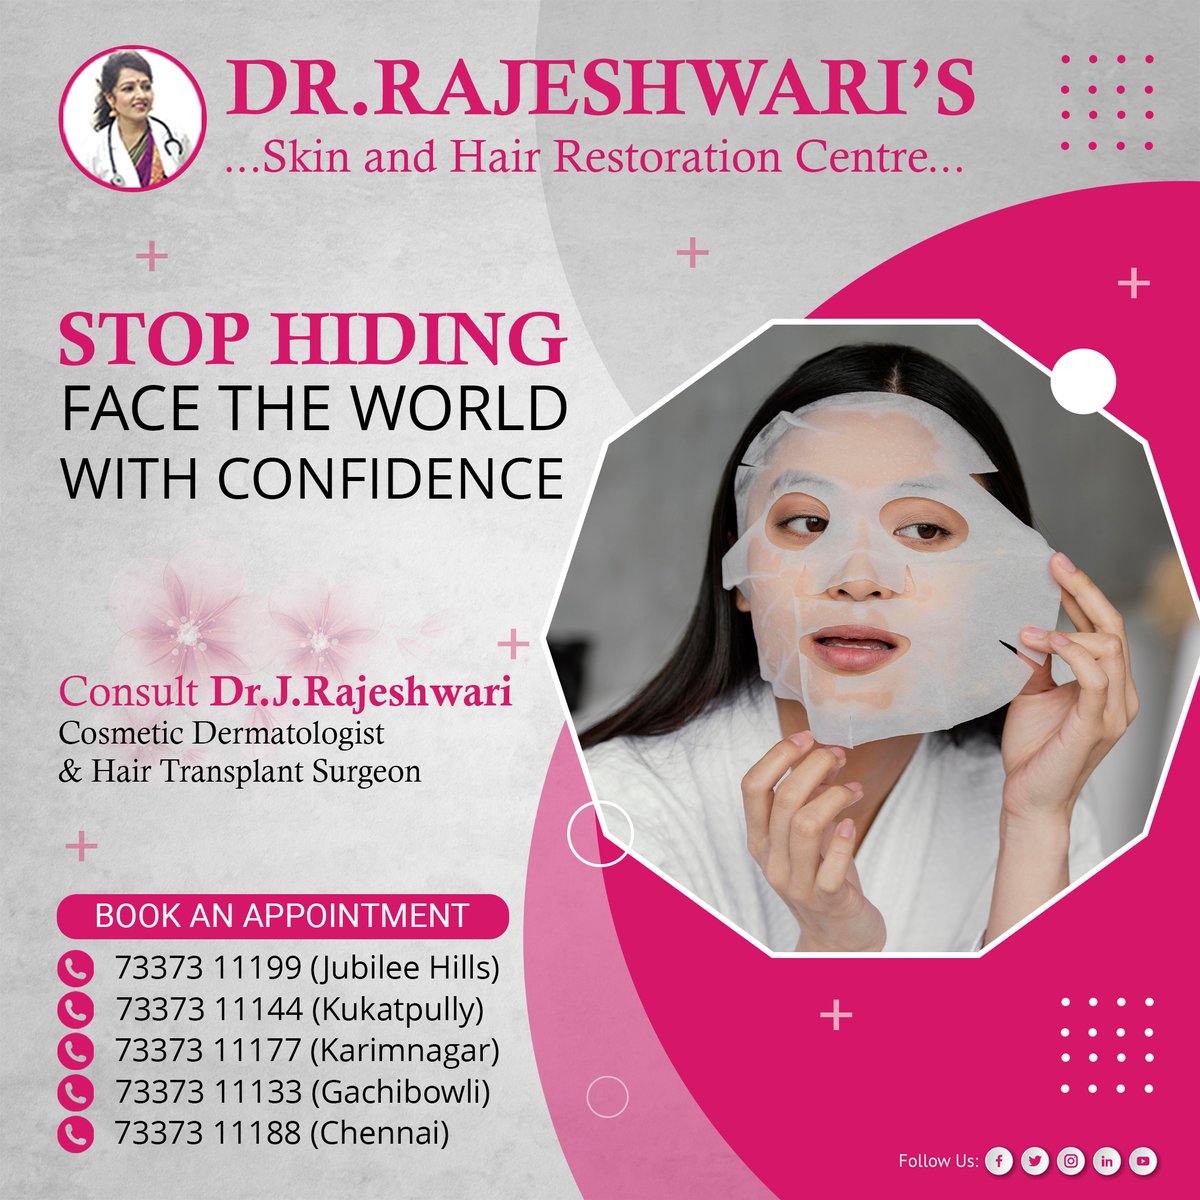 Don't Hide Your Skin – Embrace Your Natural Beauty with Our Experts by Your Side!
drrajeshwaris.com
#SkincareExperts #HealthySkin #NaturalBeauty #GlowingComplexion #ConfidenceInYou #BeautyCare #RadiantSkin #SkincareSolutions #FlawlessFace #LoveYourSkin #ExpertAdvice